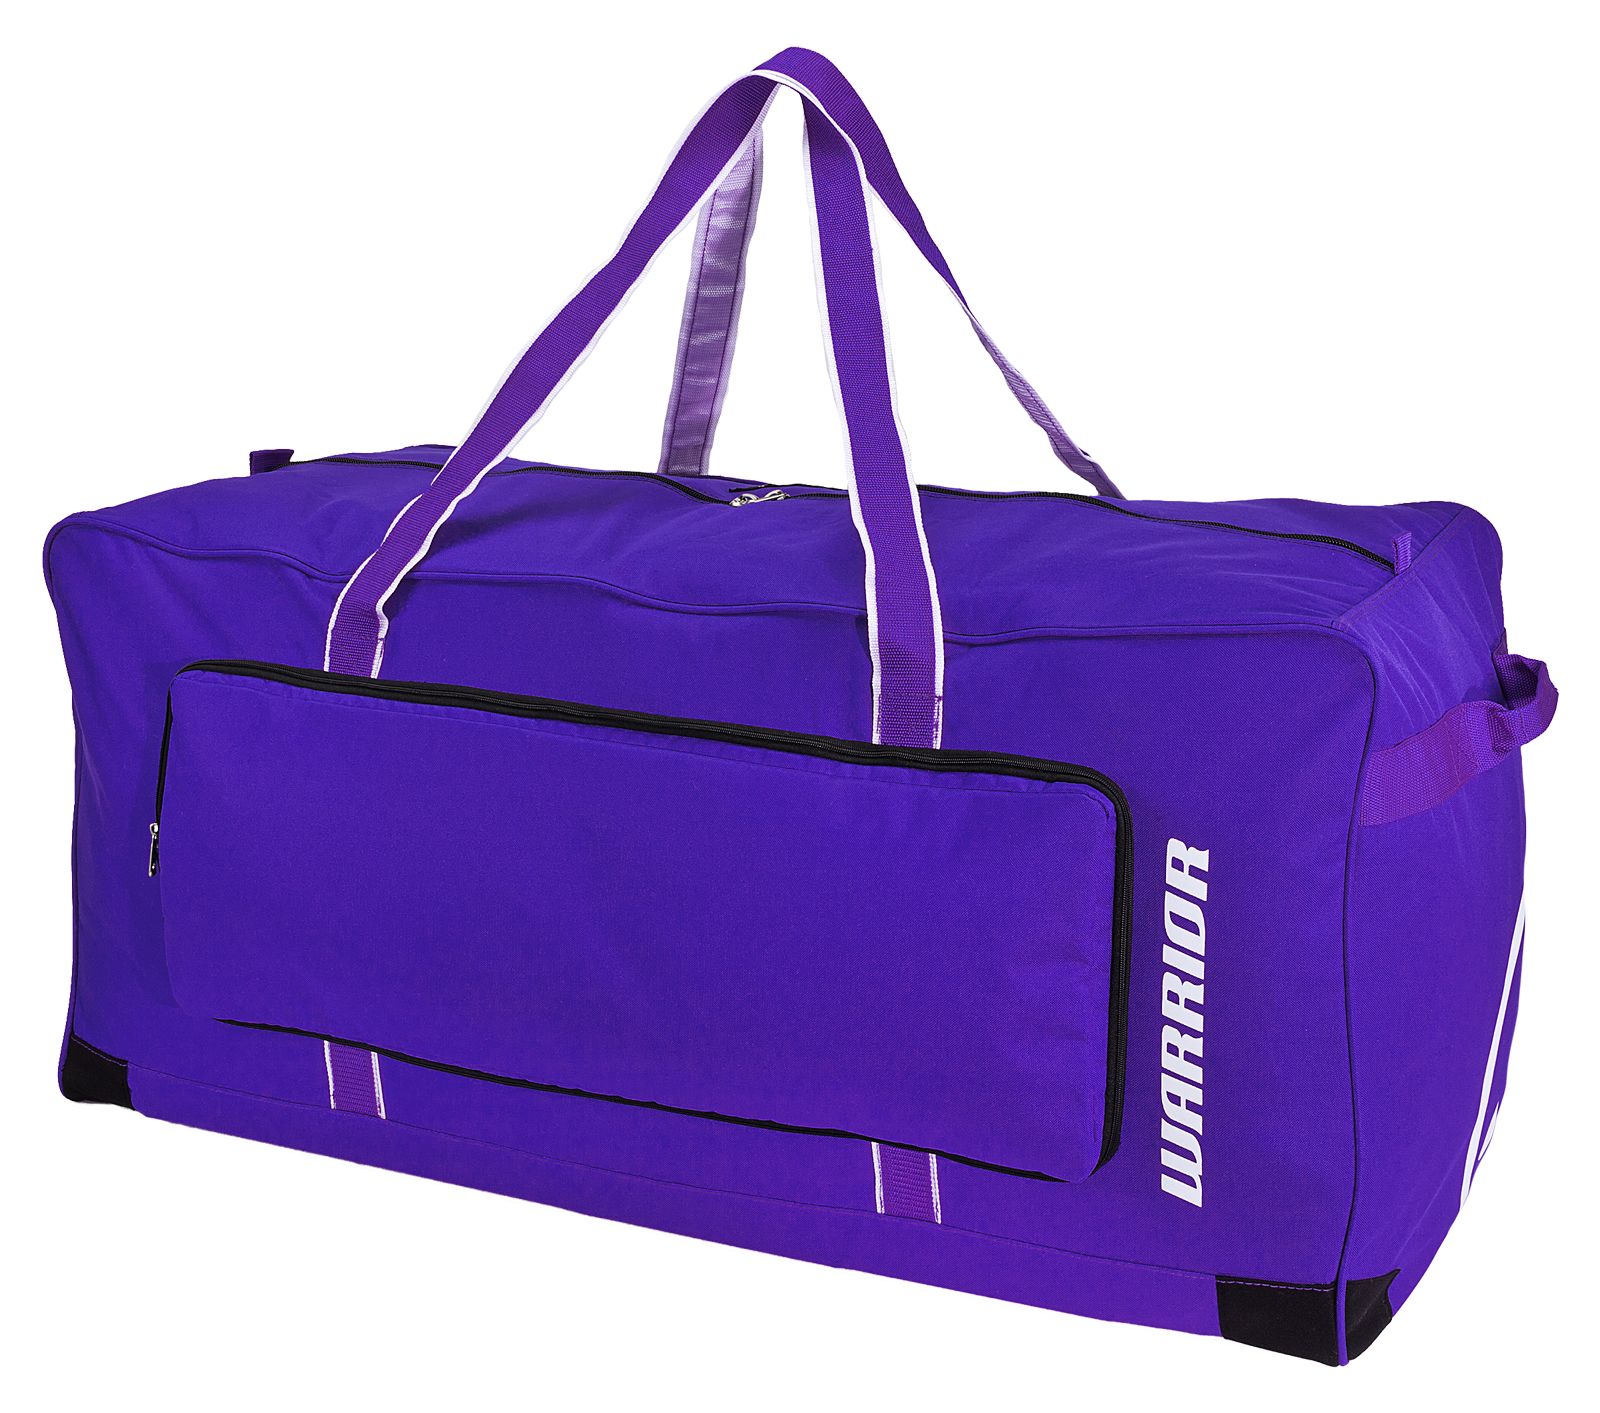 Team Goalie Duffel Bag, Purple with White image number 1